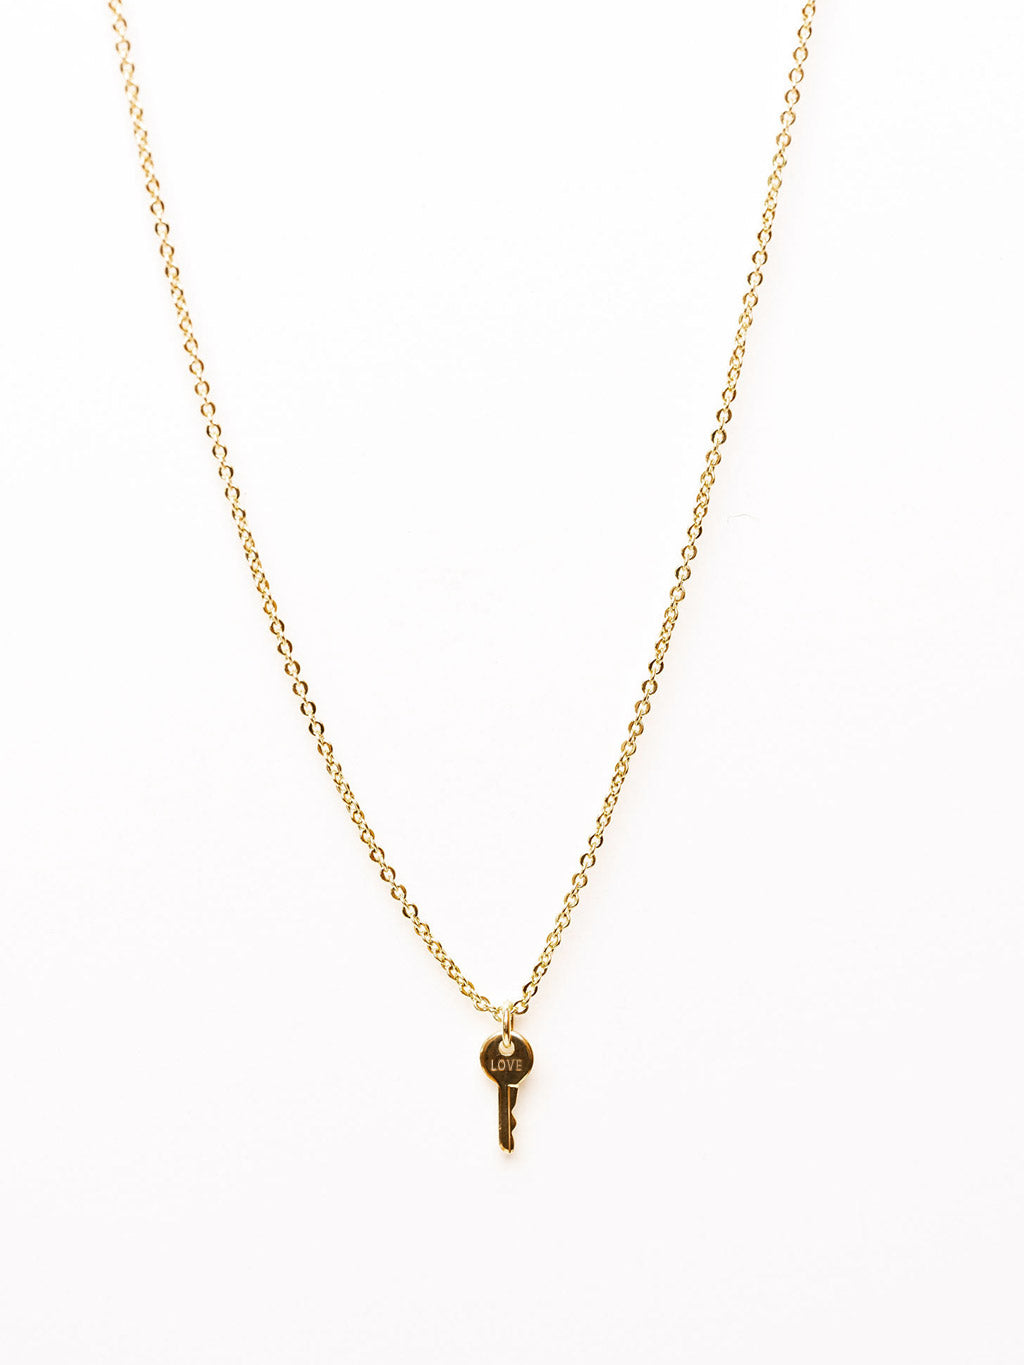 Mini Key Necklace Necklaces The Giving Keys LOVE Gold 